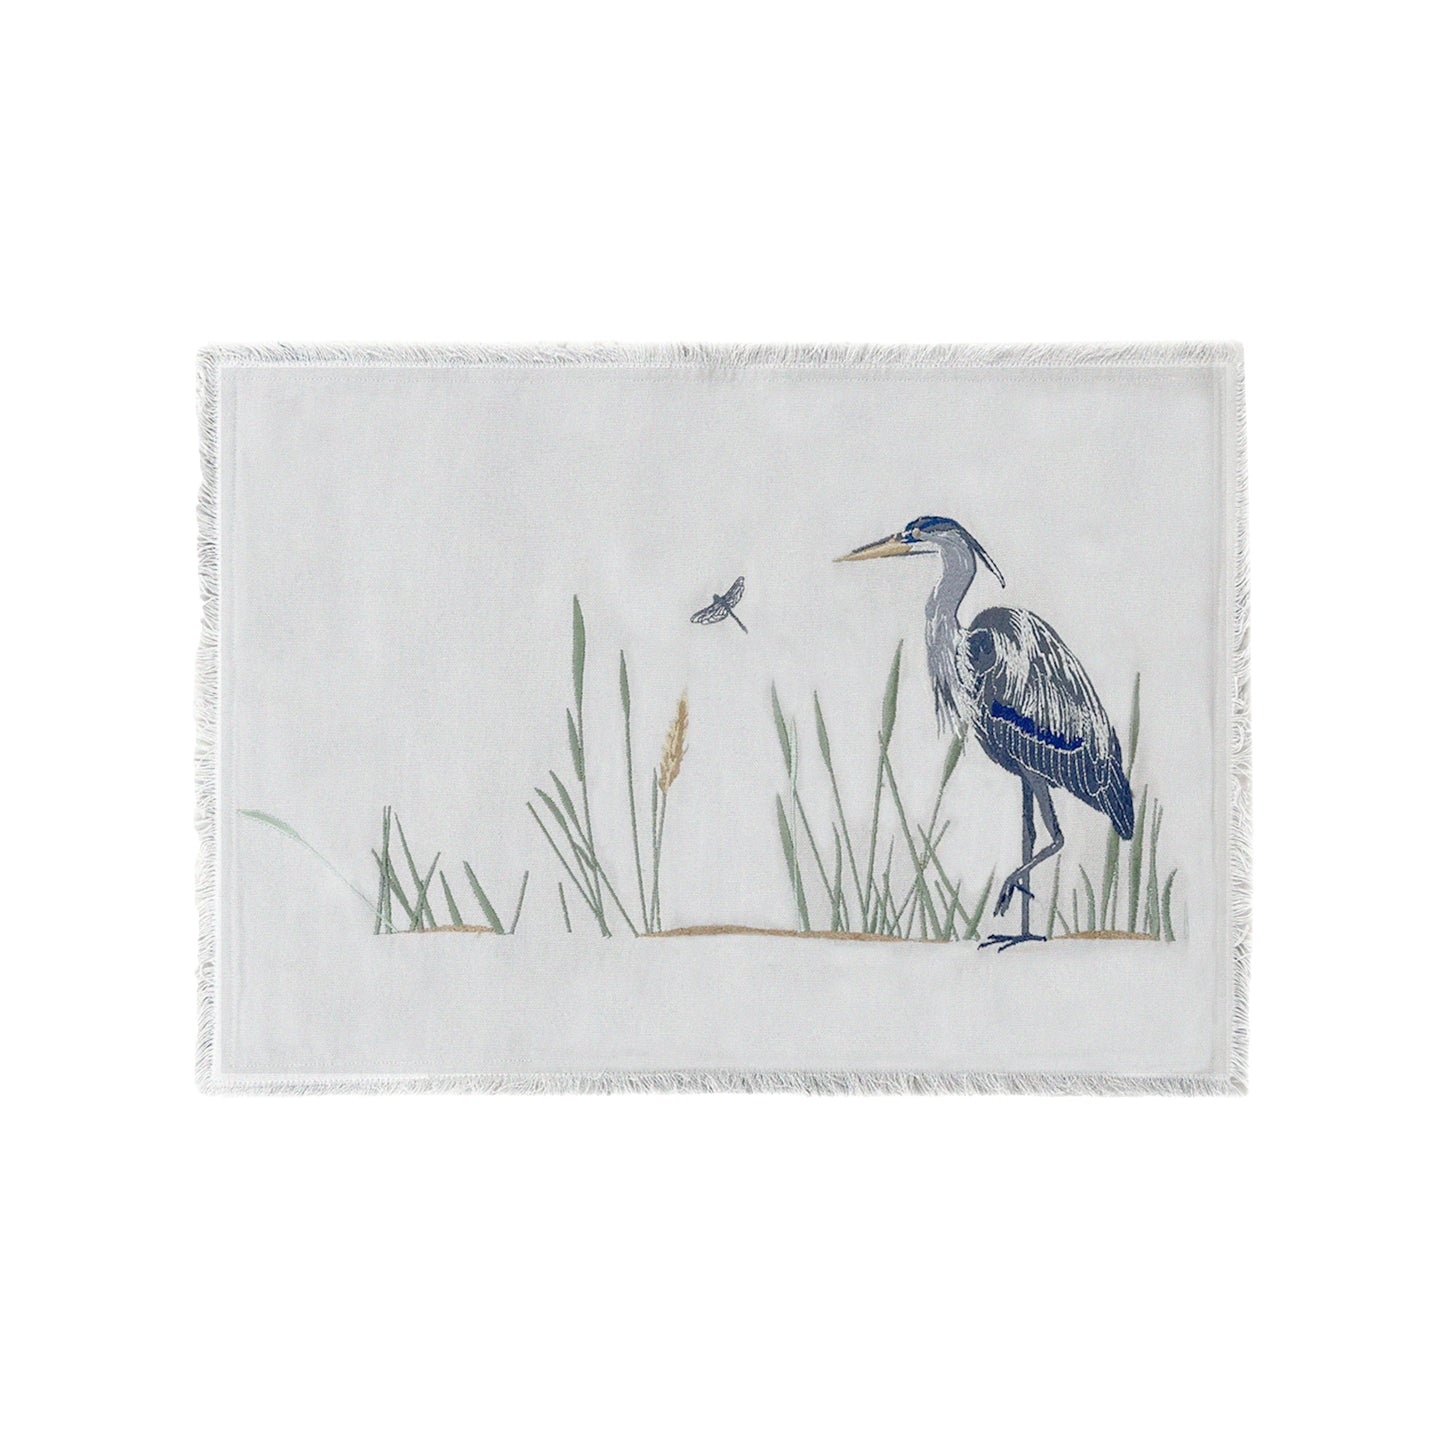 Grey cotton fringed placemat featuring embroidery of Great Blue Heron and reeds. 